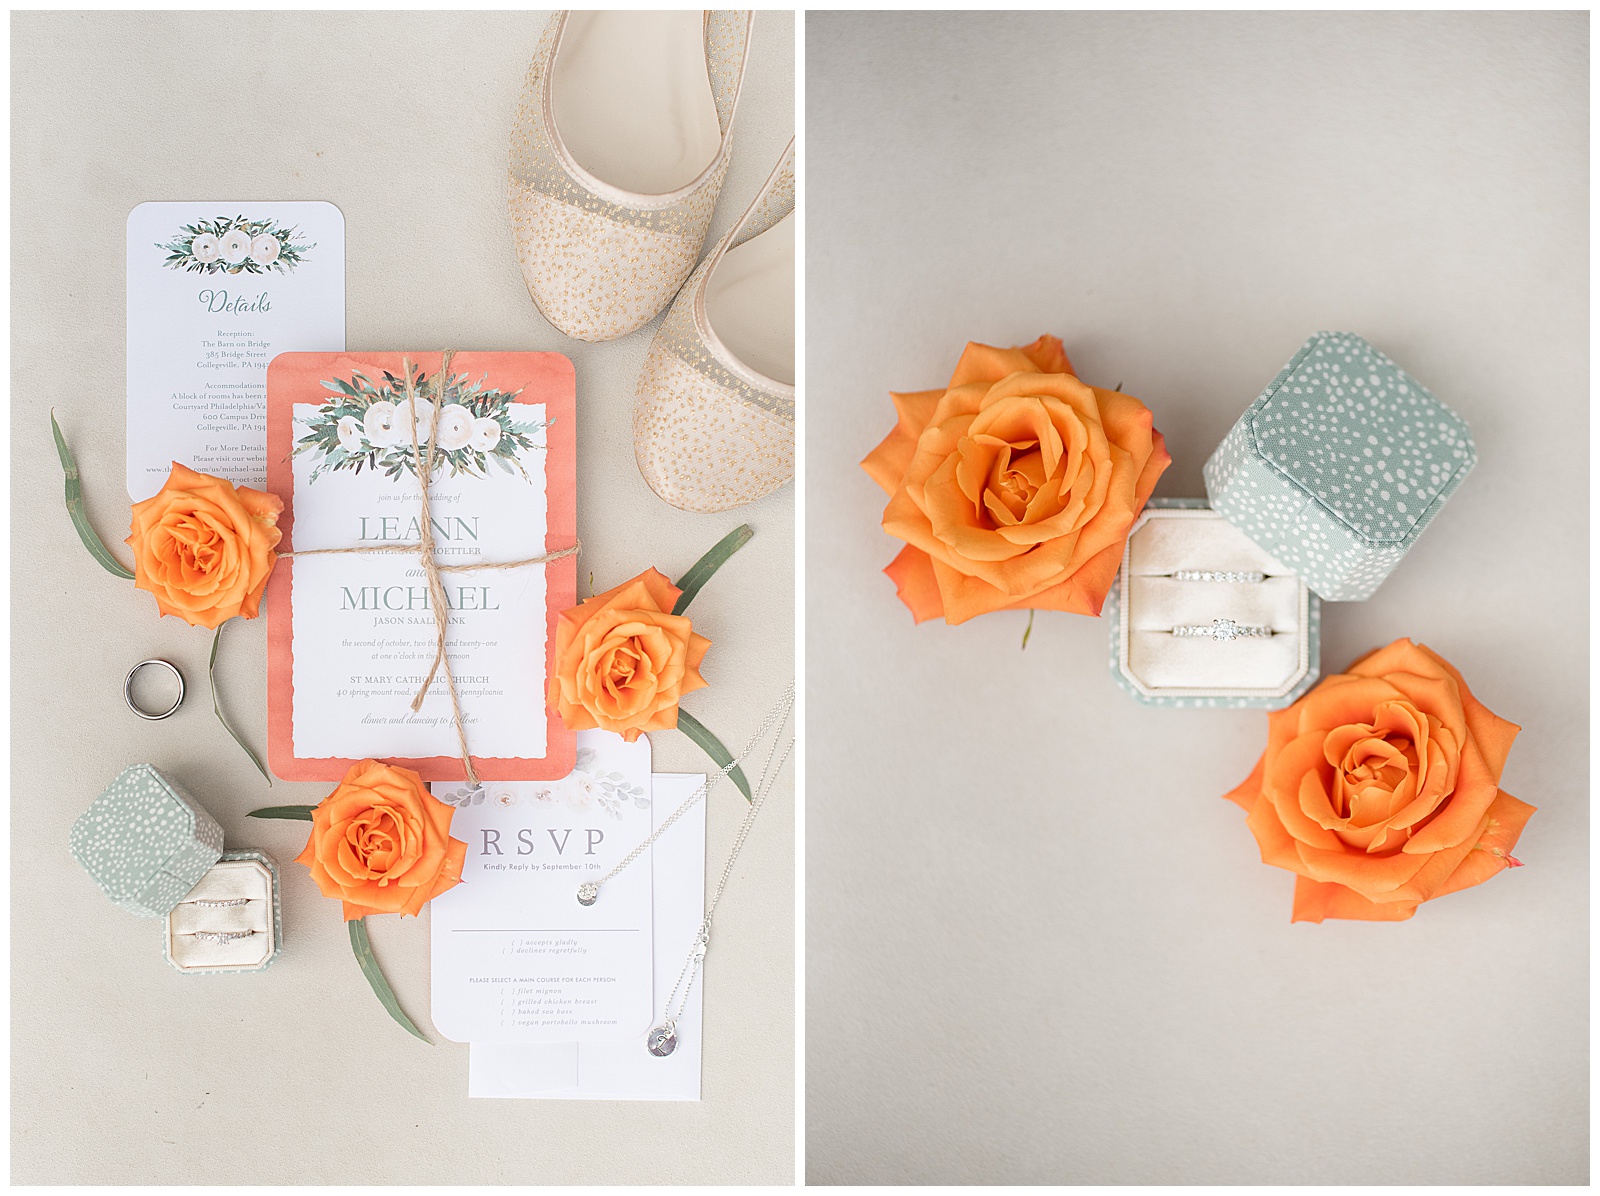 wedding invitation cards displayed with bright orange roses and bride's shoes